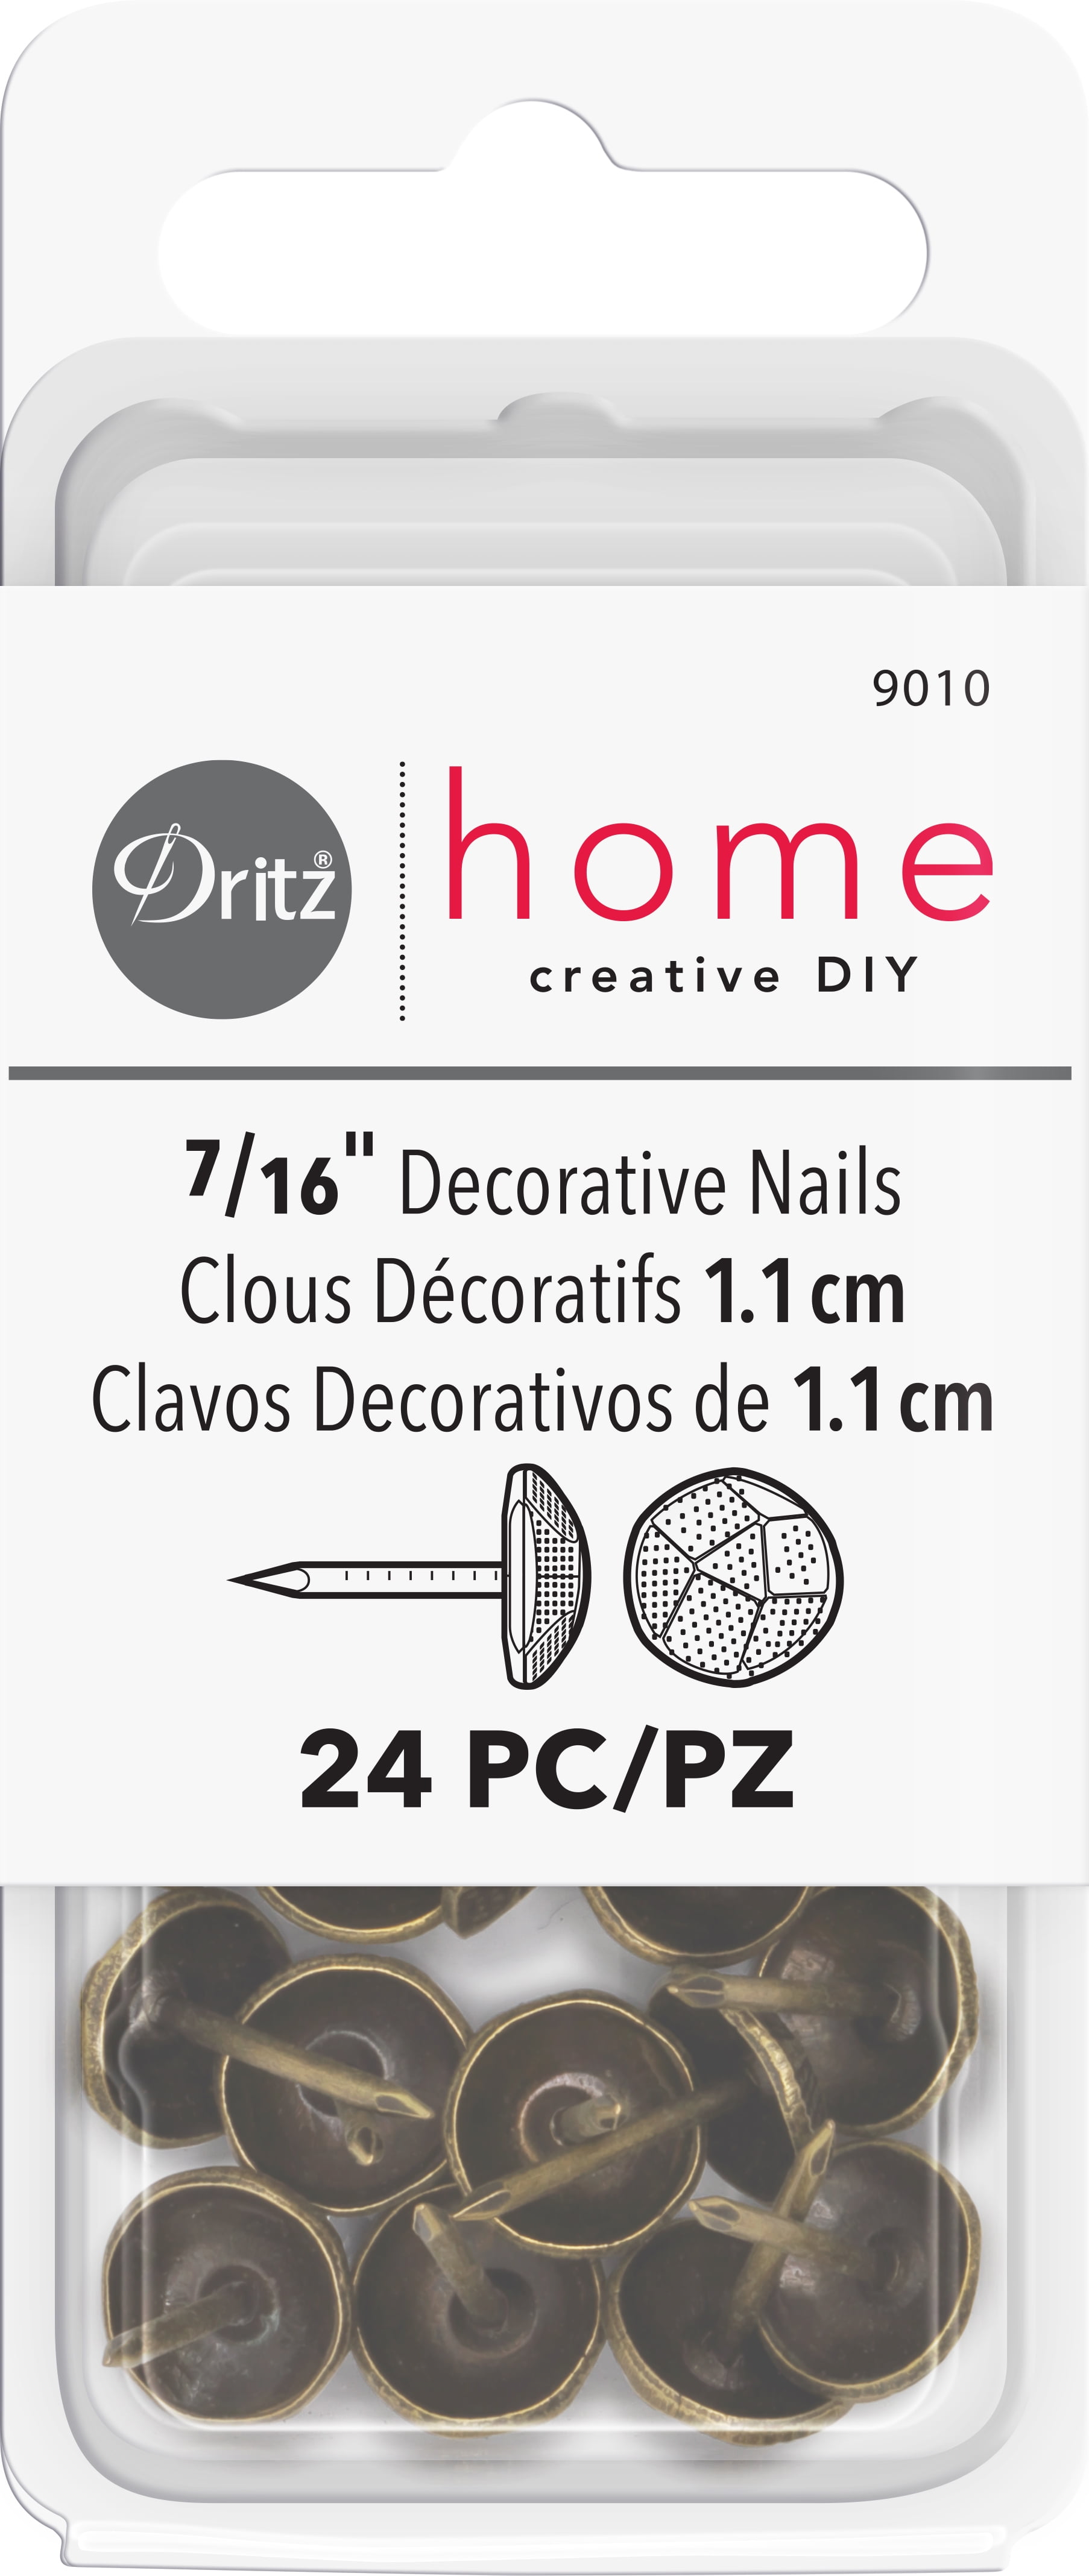 Dritz Home Space & Set Toold For Decorative Nails 